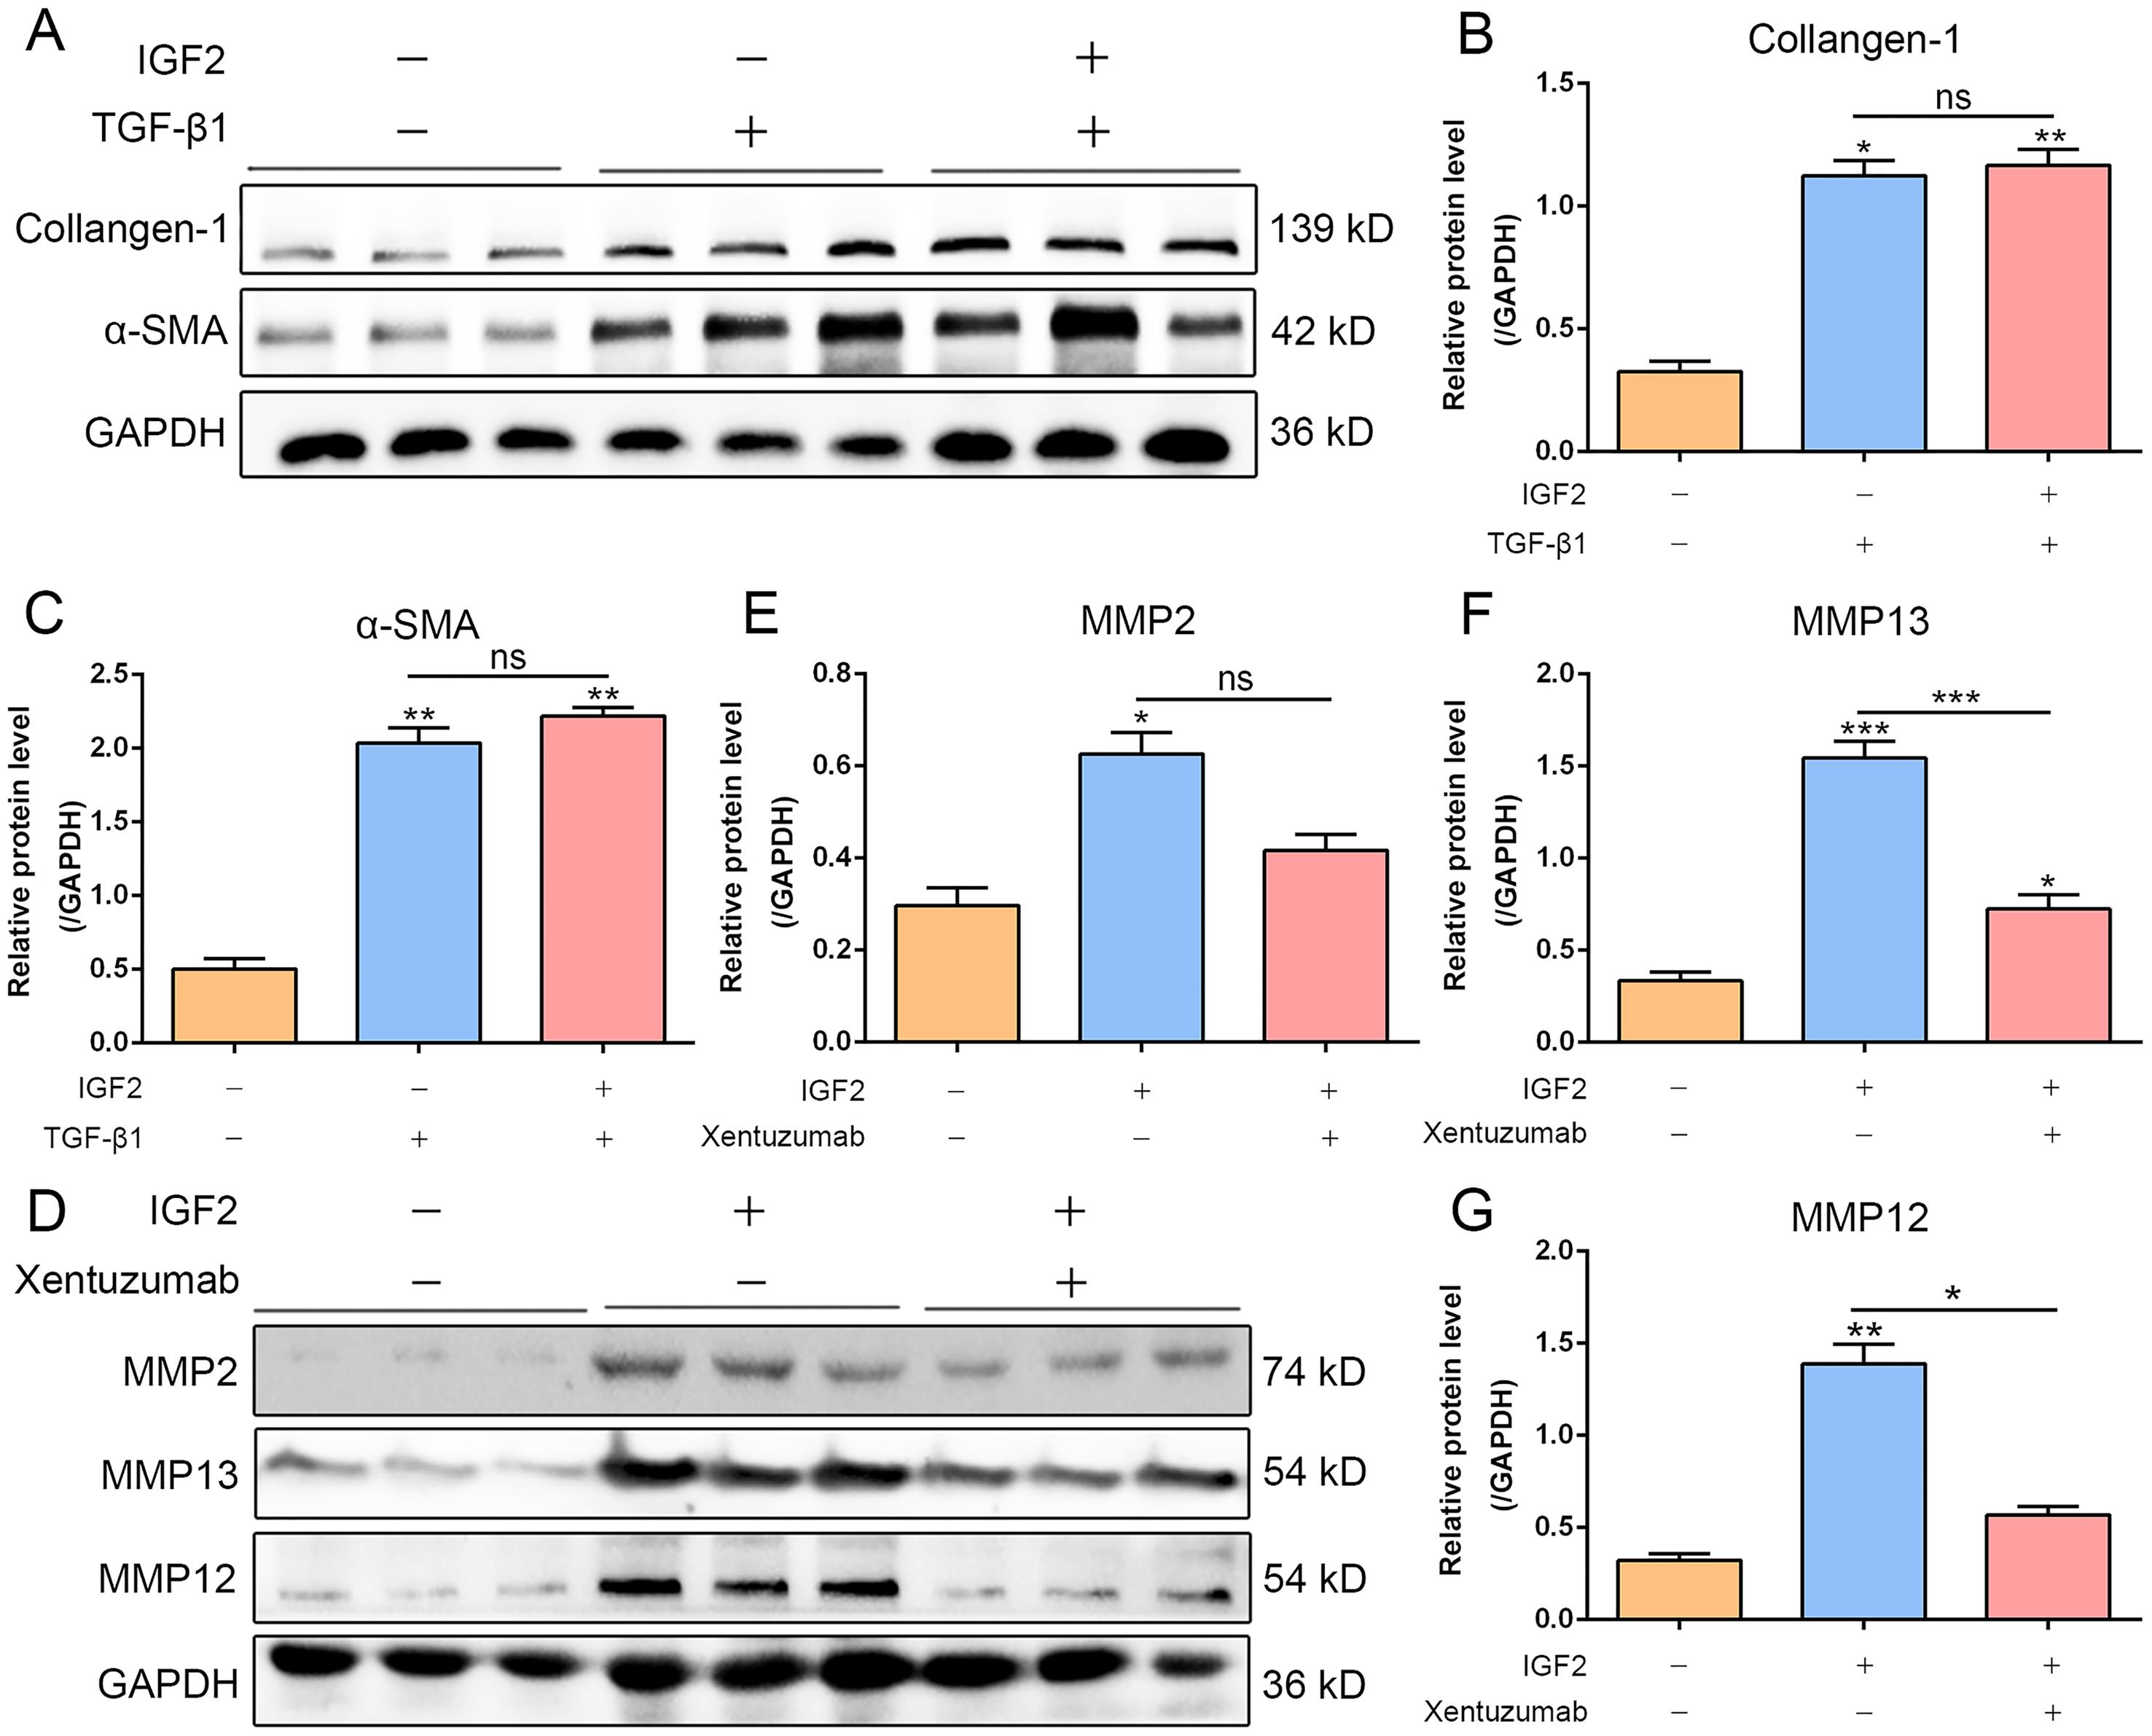 The IGF2-NR4A2 pathway alleviates liver cirrhosis by inducing matrix metalloproteinases in macrophages.